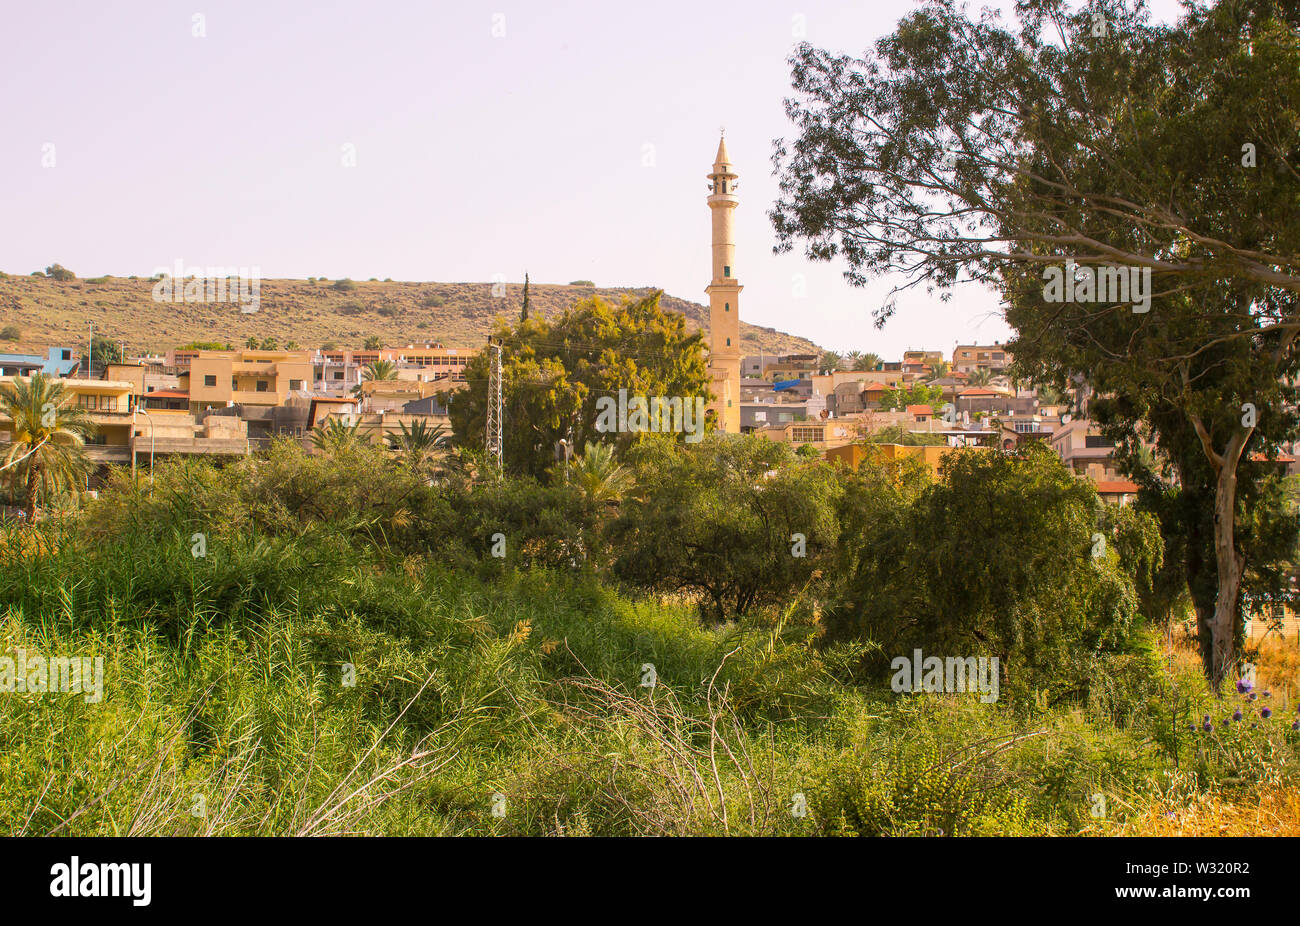 An Islamic mosque with it's towering minoret in the small village of Ginosar Israel Stock Photo